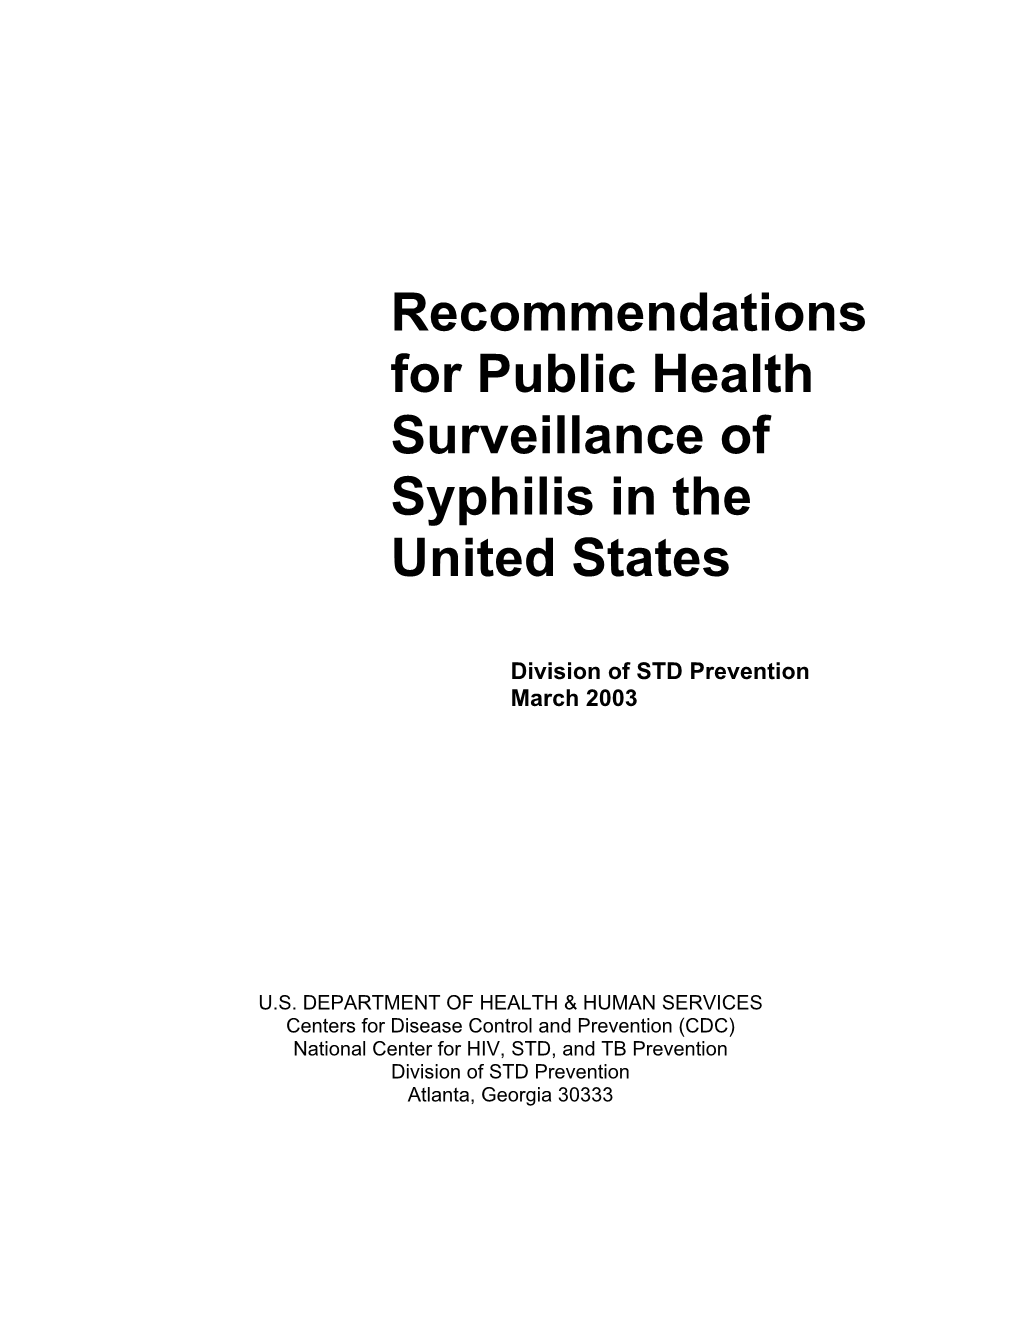 Recommendations for Public Health Surveillance of Syphilis in the United States